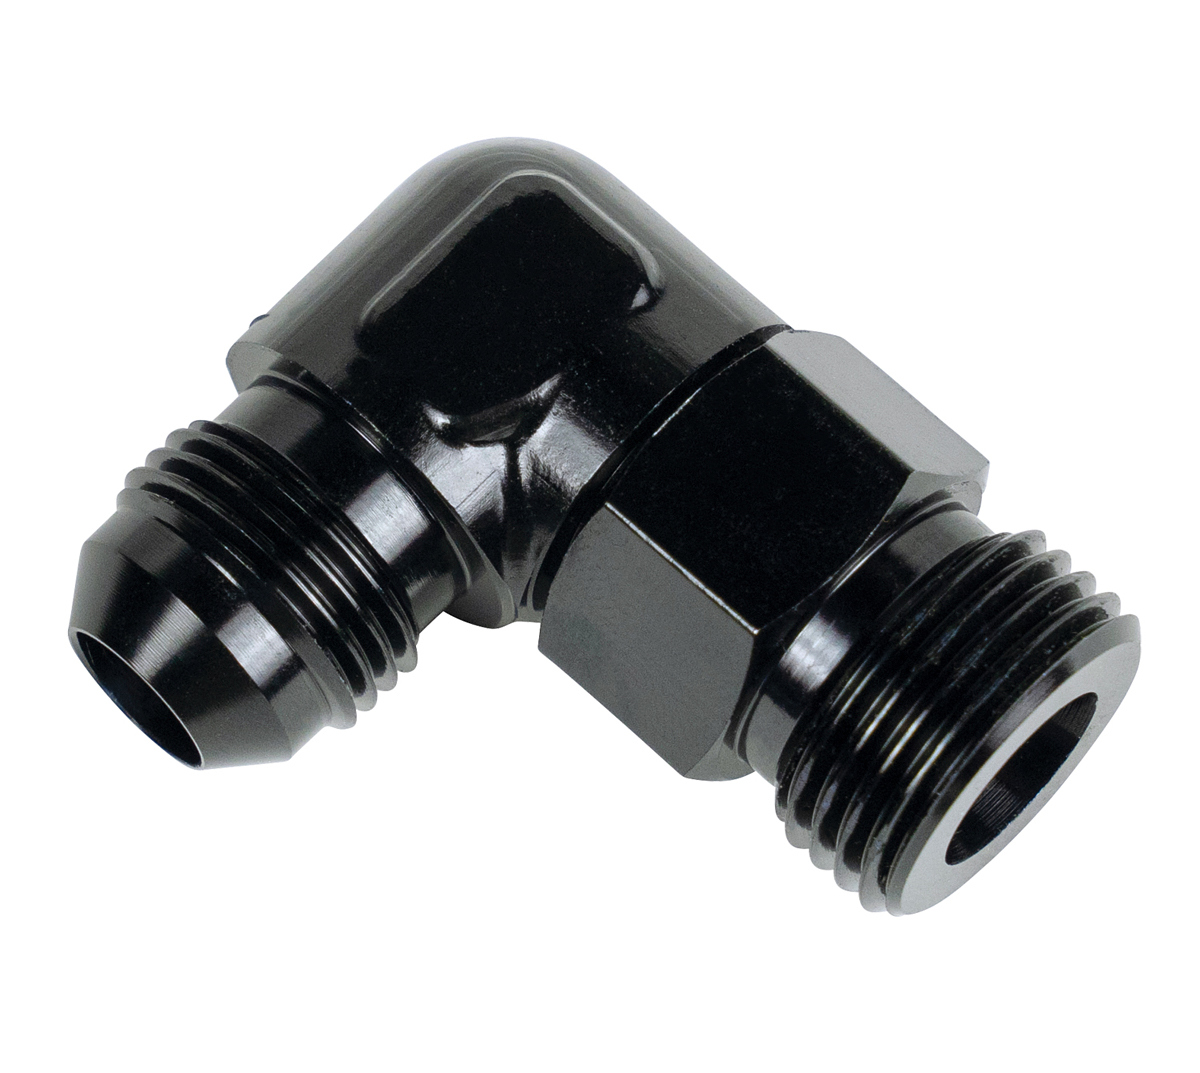 Derale 59508 Fitting, Adapter, 90 Degree, 7/8-14 in NPT Male to 8 AN Male O-Ring, Aluminum, Black Anodized, Each